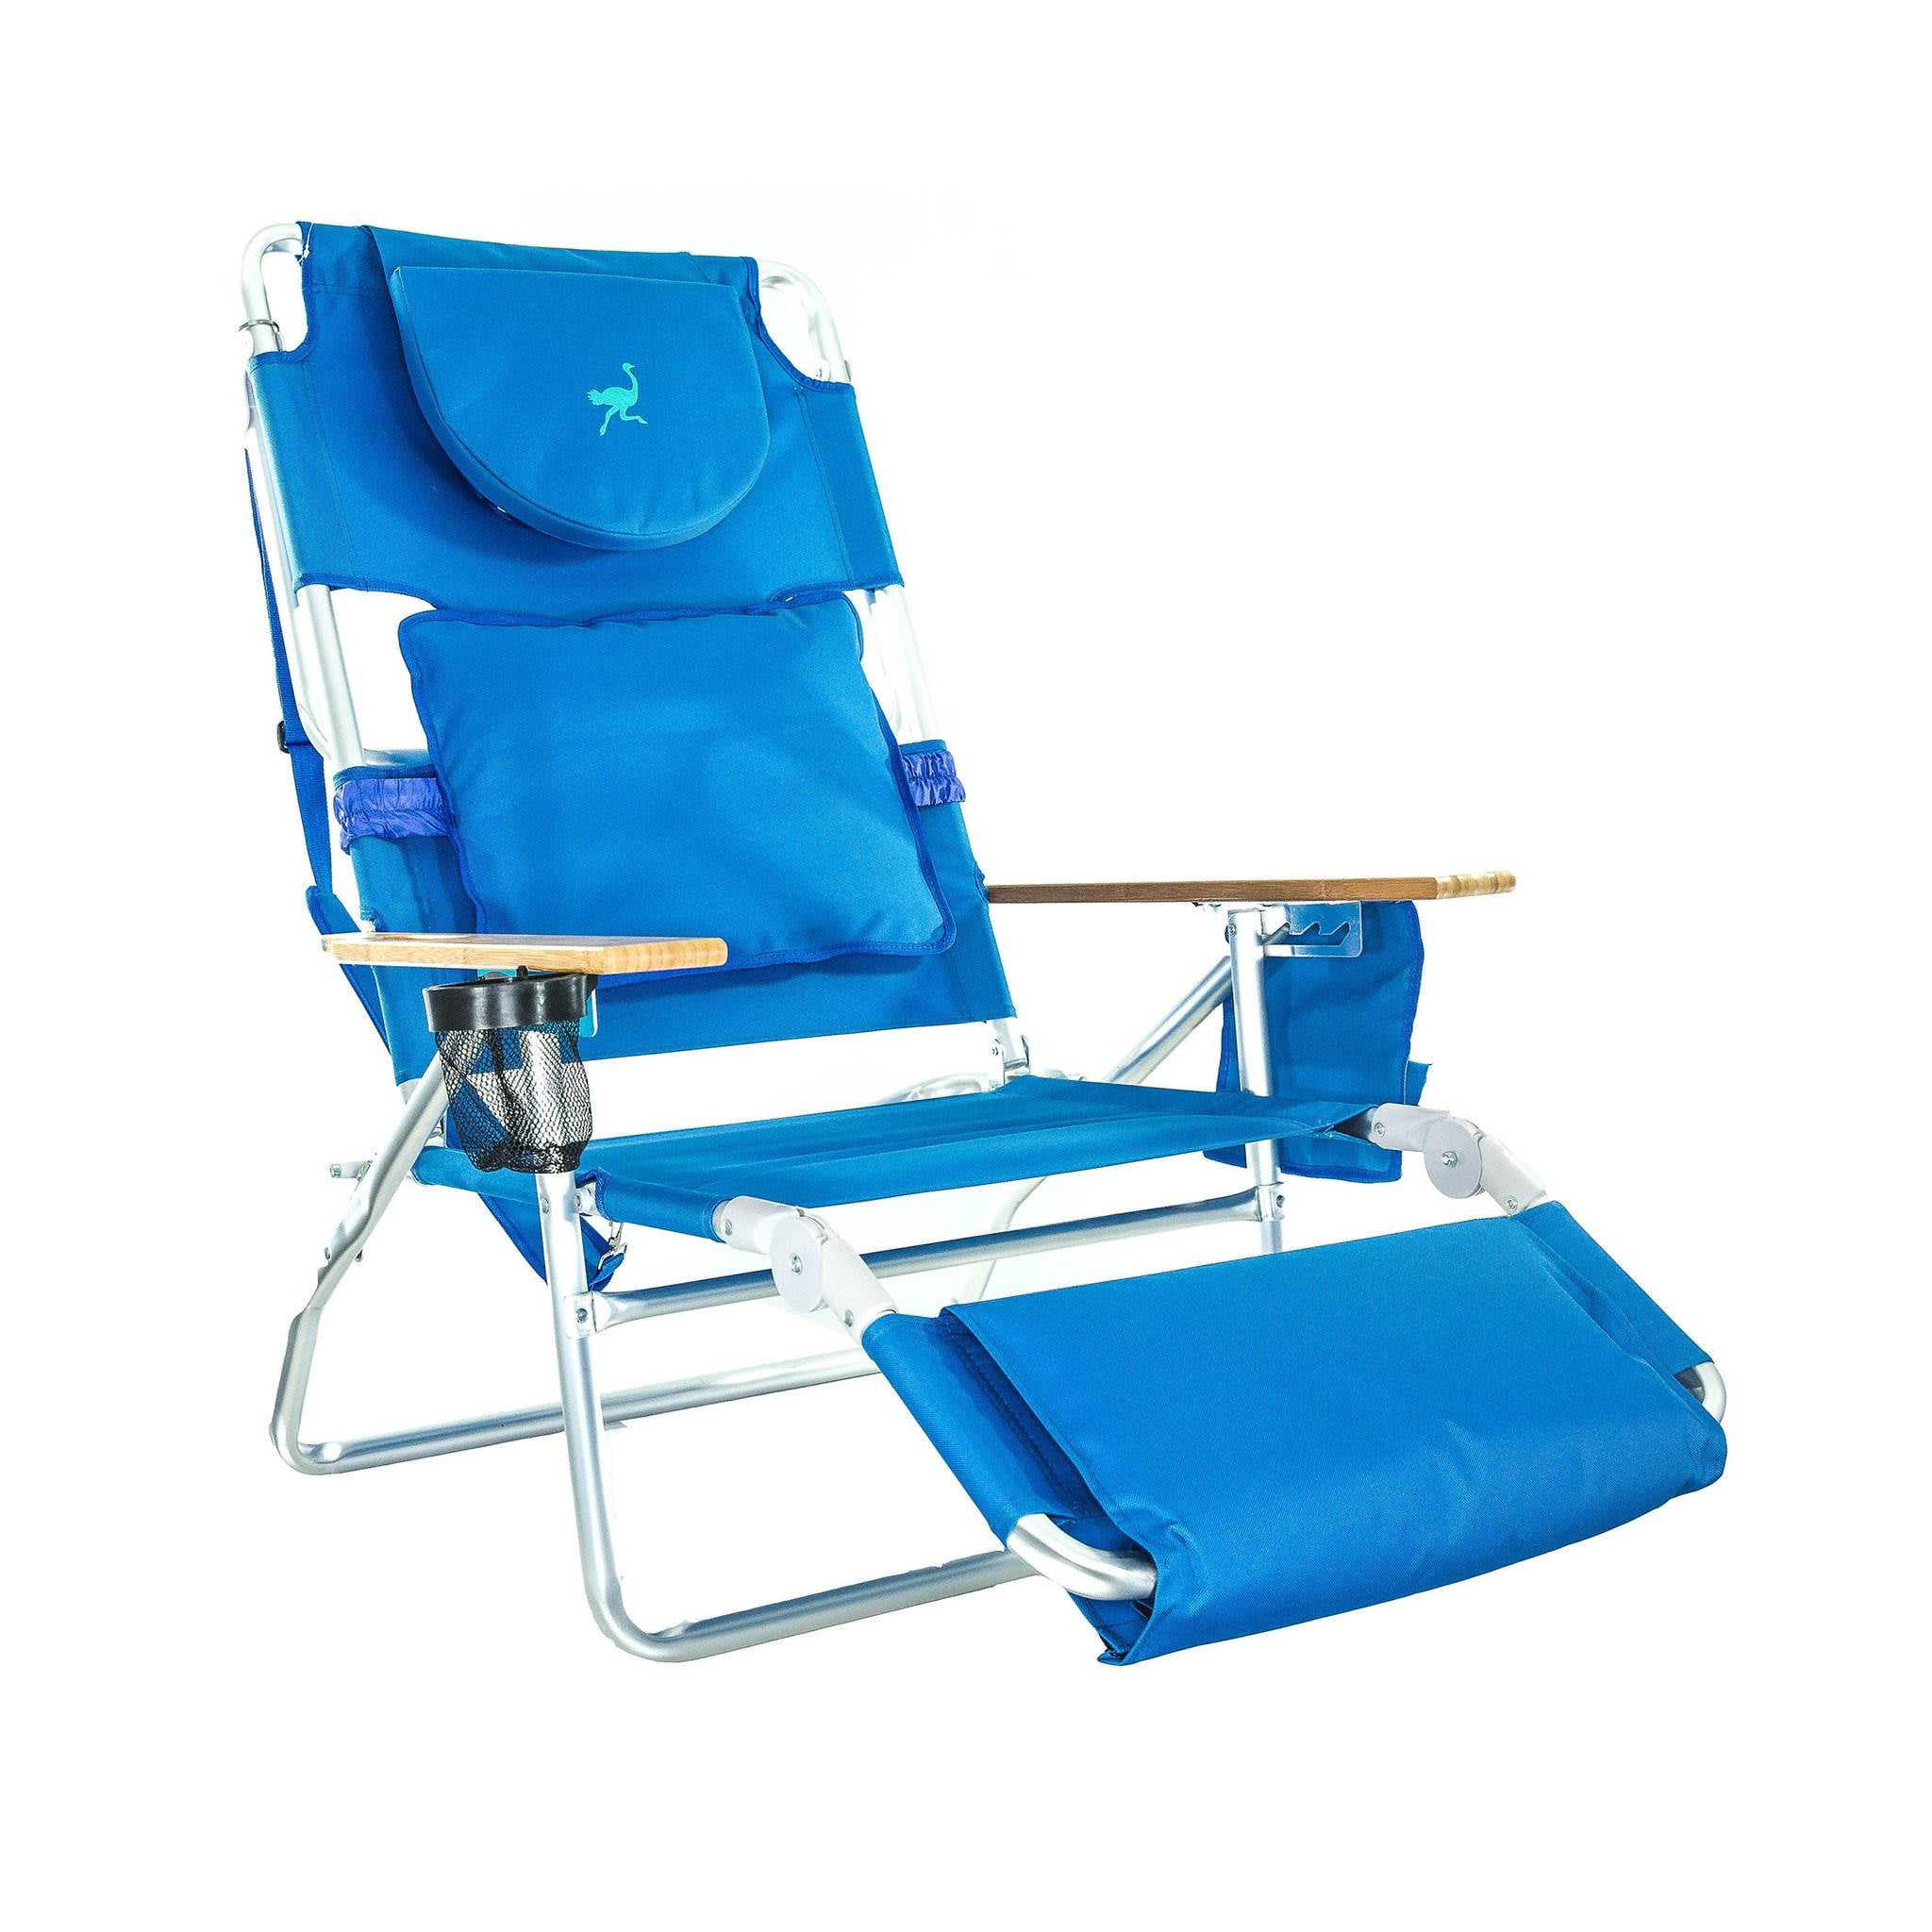 Minimalist Ostrich Beach Chair Reviews for Small Space